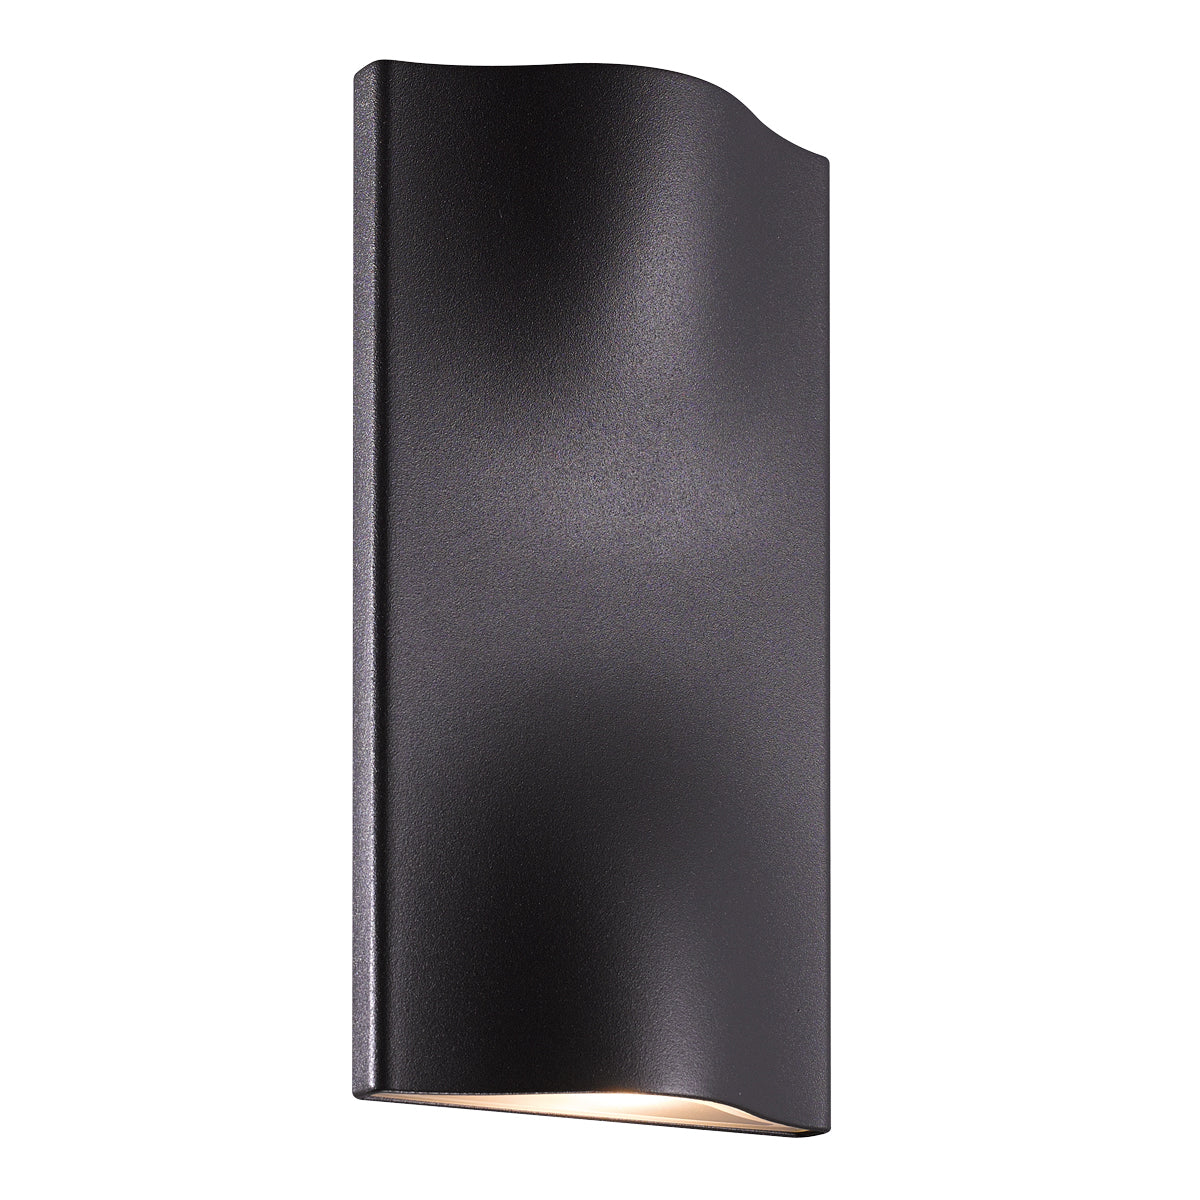 HAVEN Outdoor sconce Aluminum - 28278-023 INTEGRATED LED | EUROFASE